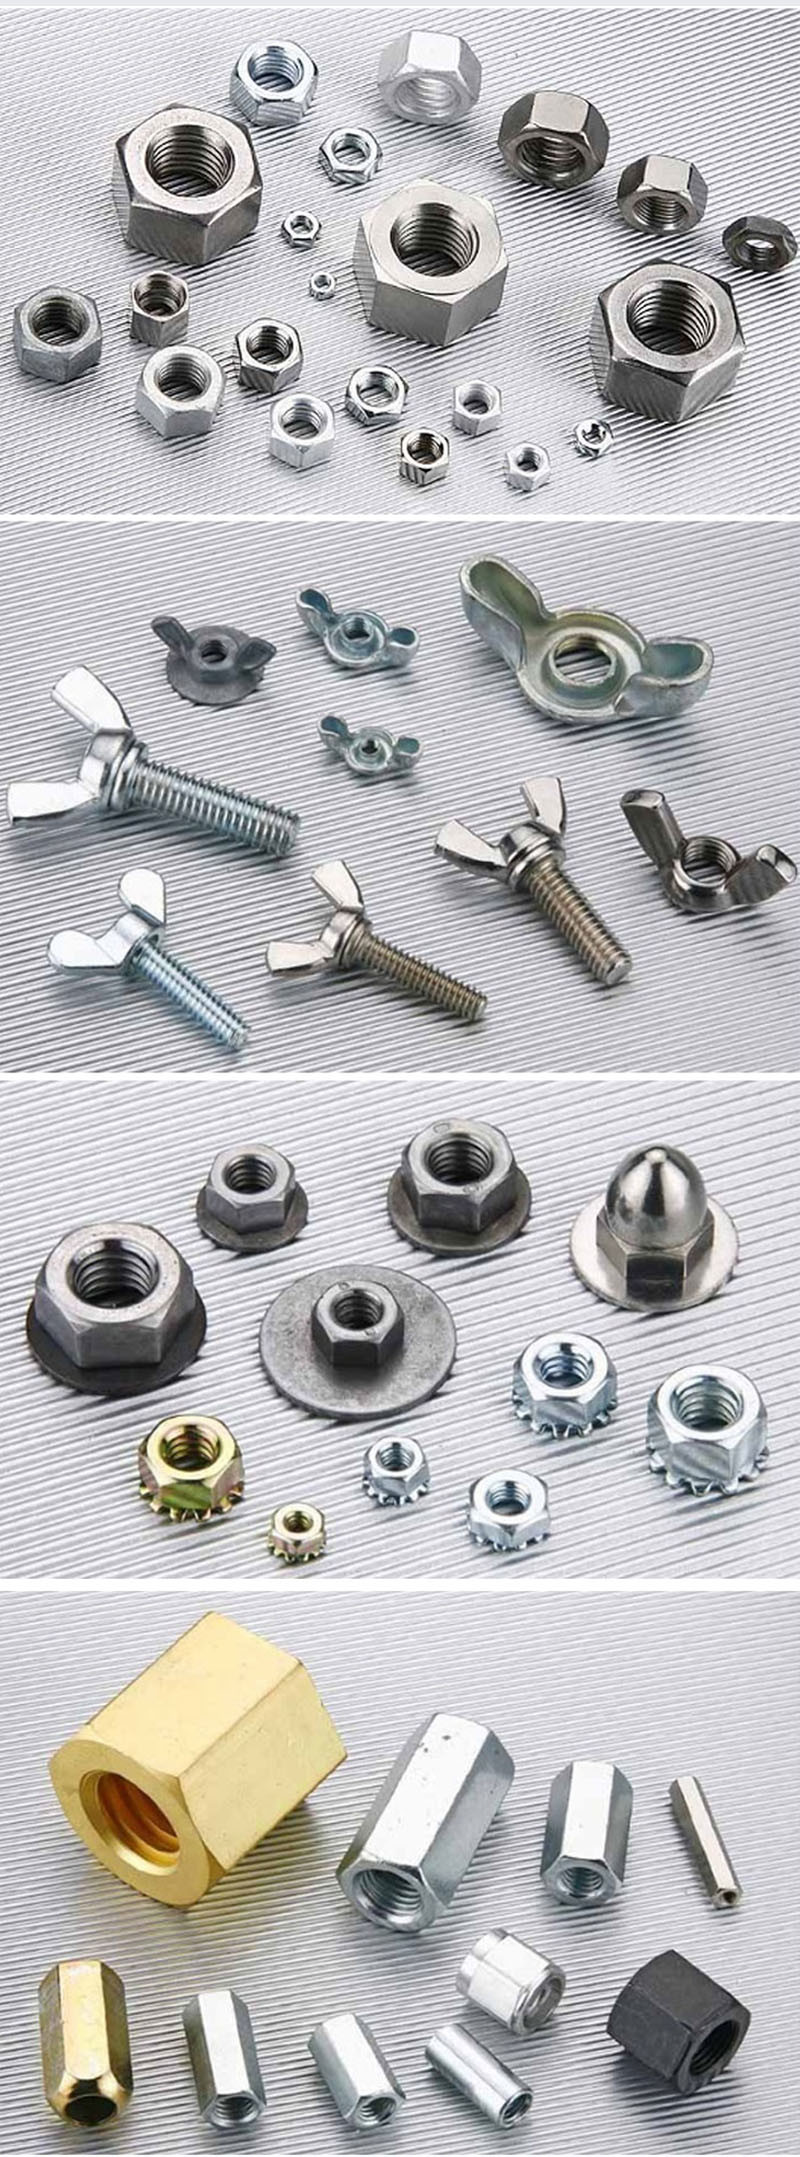 DIN Standarded Cross-Slotted Head Self -Tapping Screw